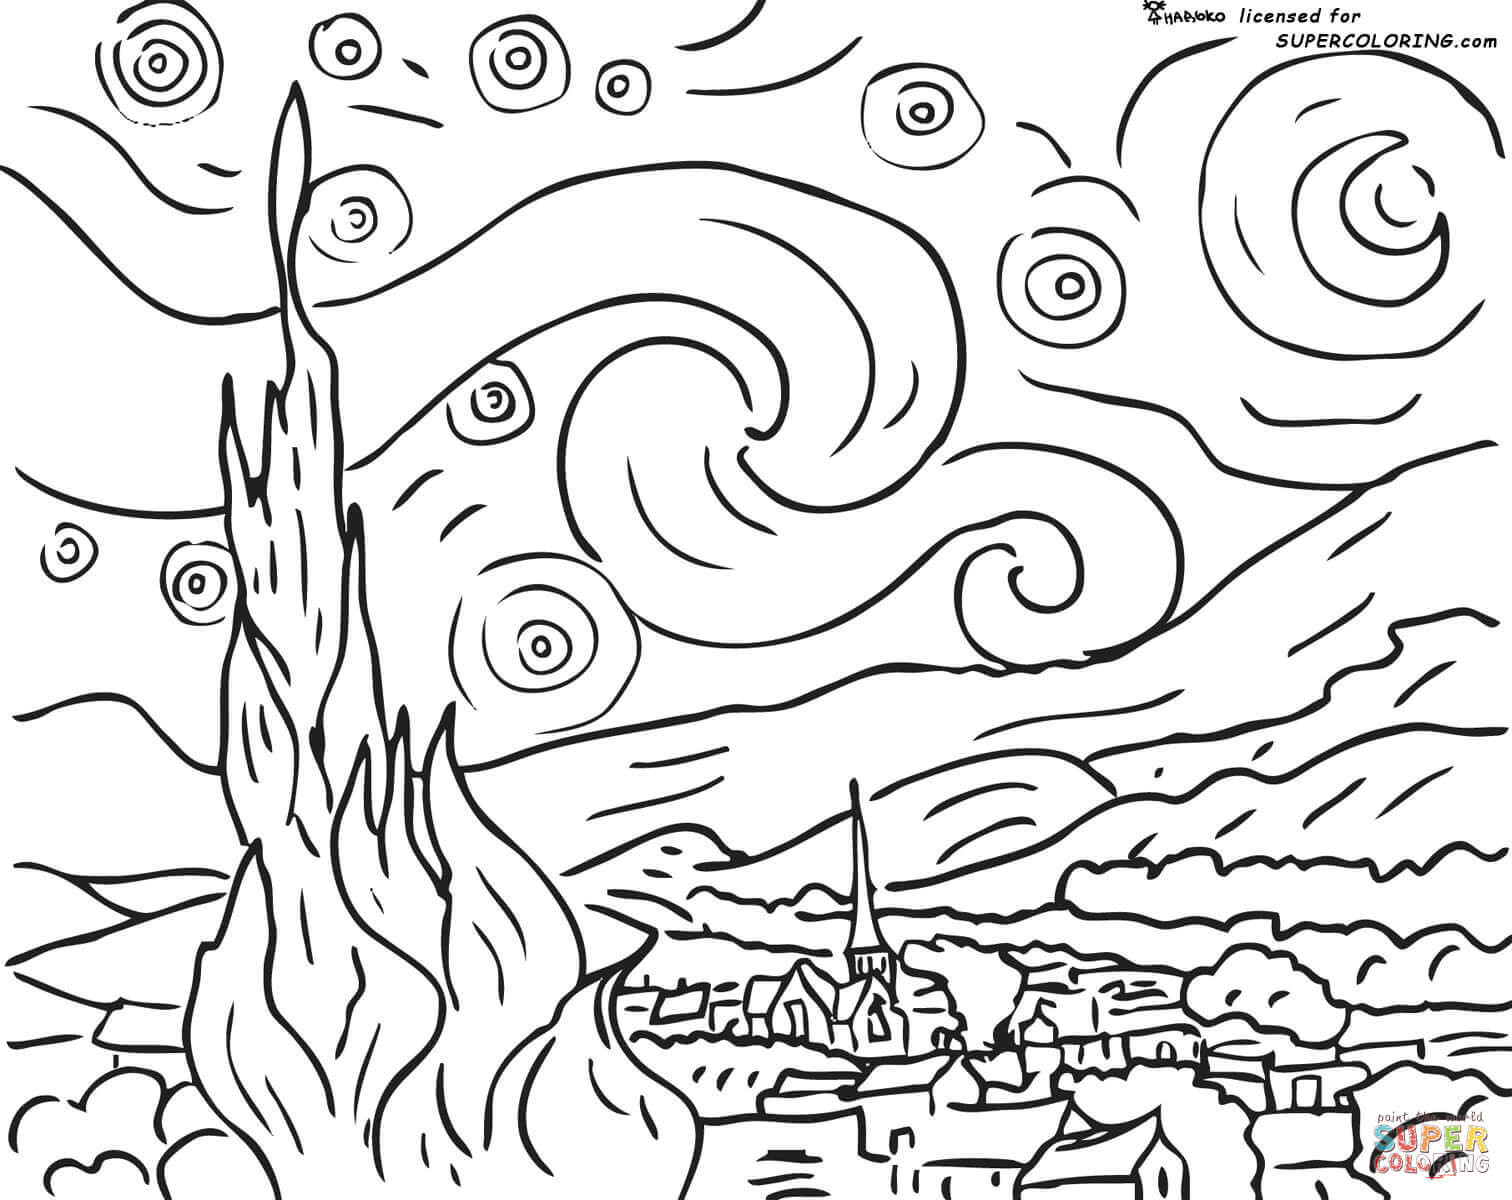 Van Gogh Coloring Pages
 Starry Night By Vincent Van Gogh coloring page